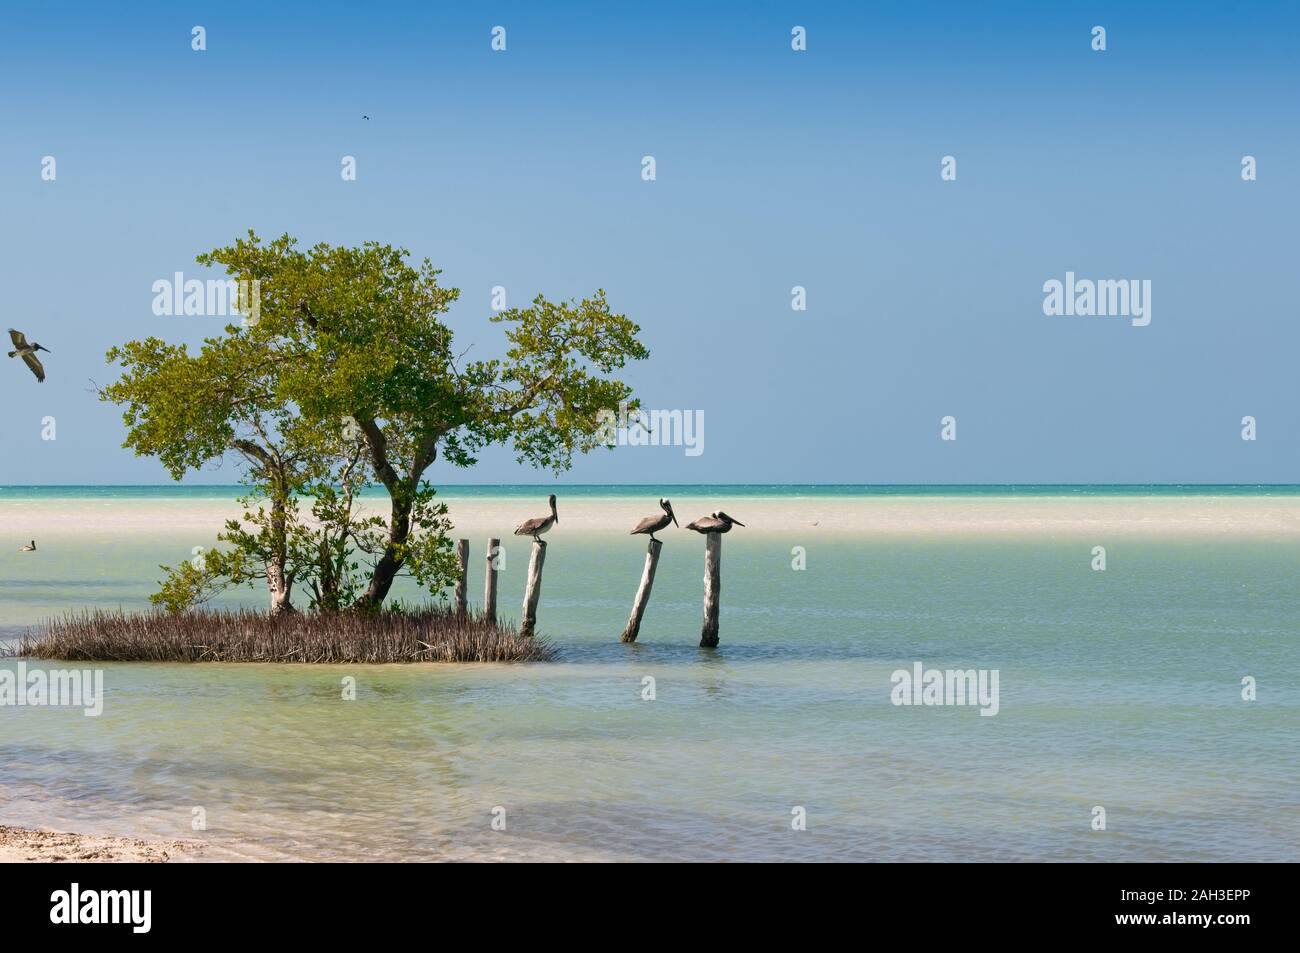 Pelicans rest on wooden poles near the beach Holbox island Mexico. Mangrove trees on the sea. Panoramic photo Caribbean sea. Stock Photo